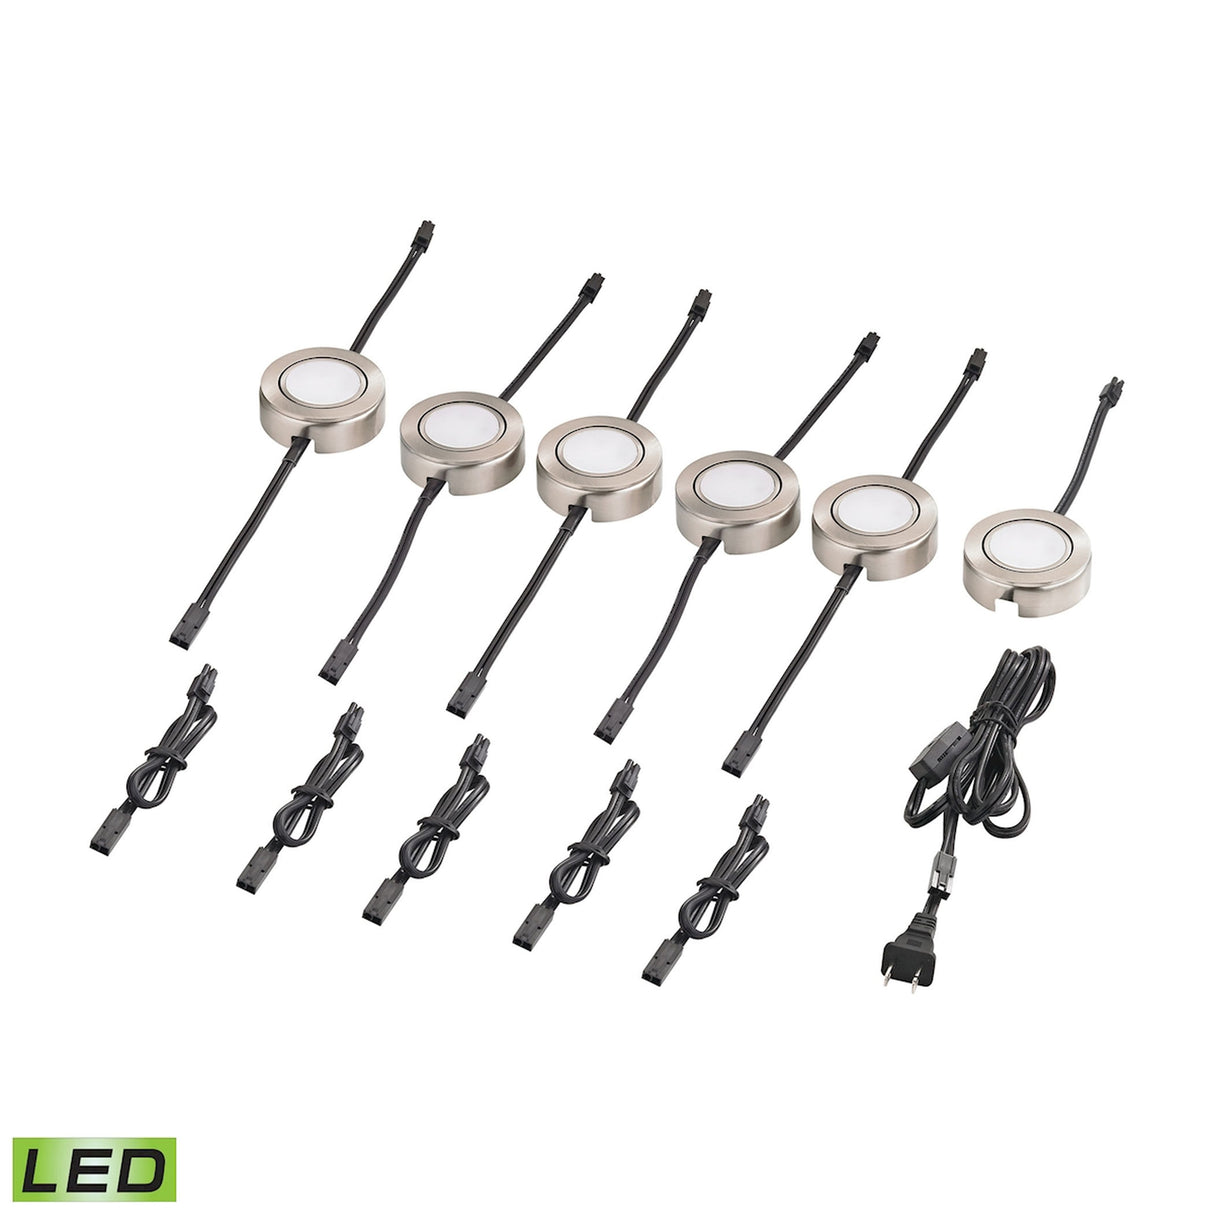 Elk MLE426-5-16MK Metal Housing, 6ft Power Cord w/Plug and Line Switch, 5Pcs 12-inch Jump Cord, 1Pc Has 1 Tail, 5Pcs